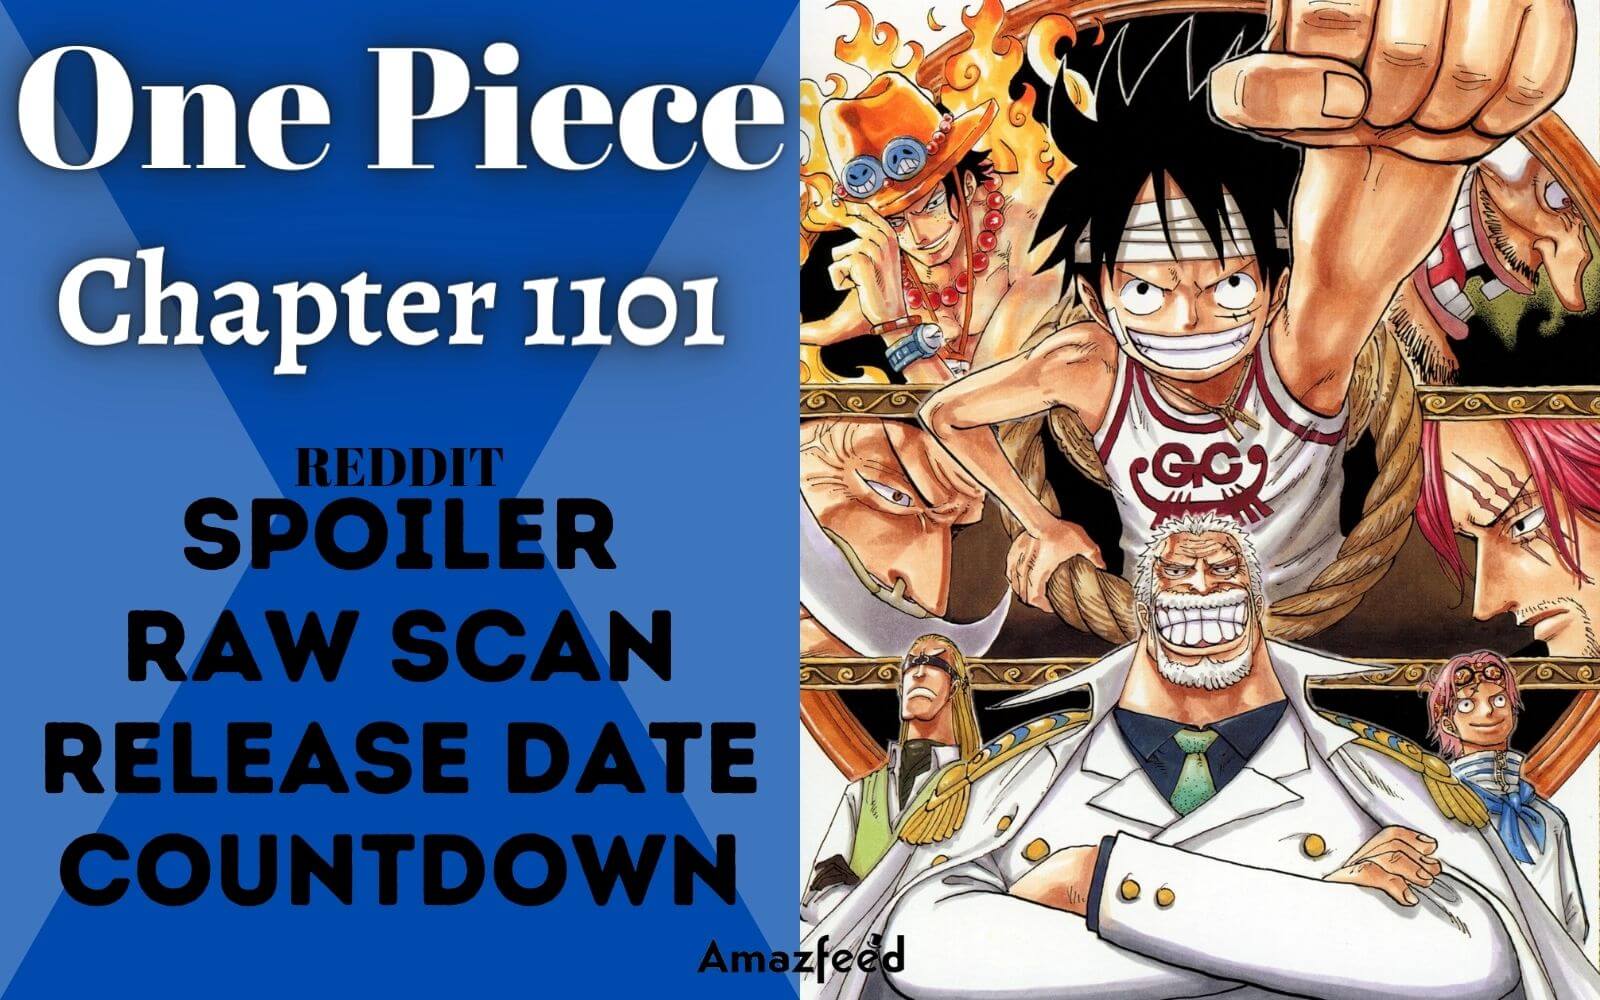 OROJAPAN on X: Some news informations about One Piece: Film Red